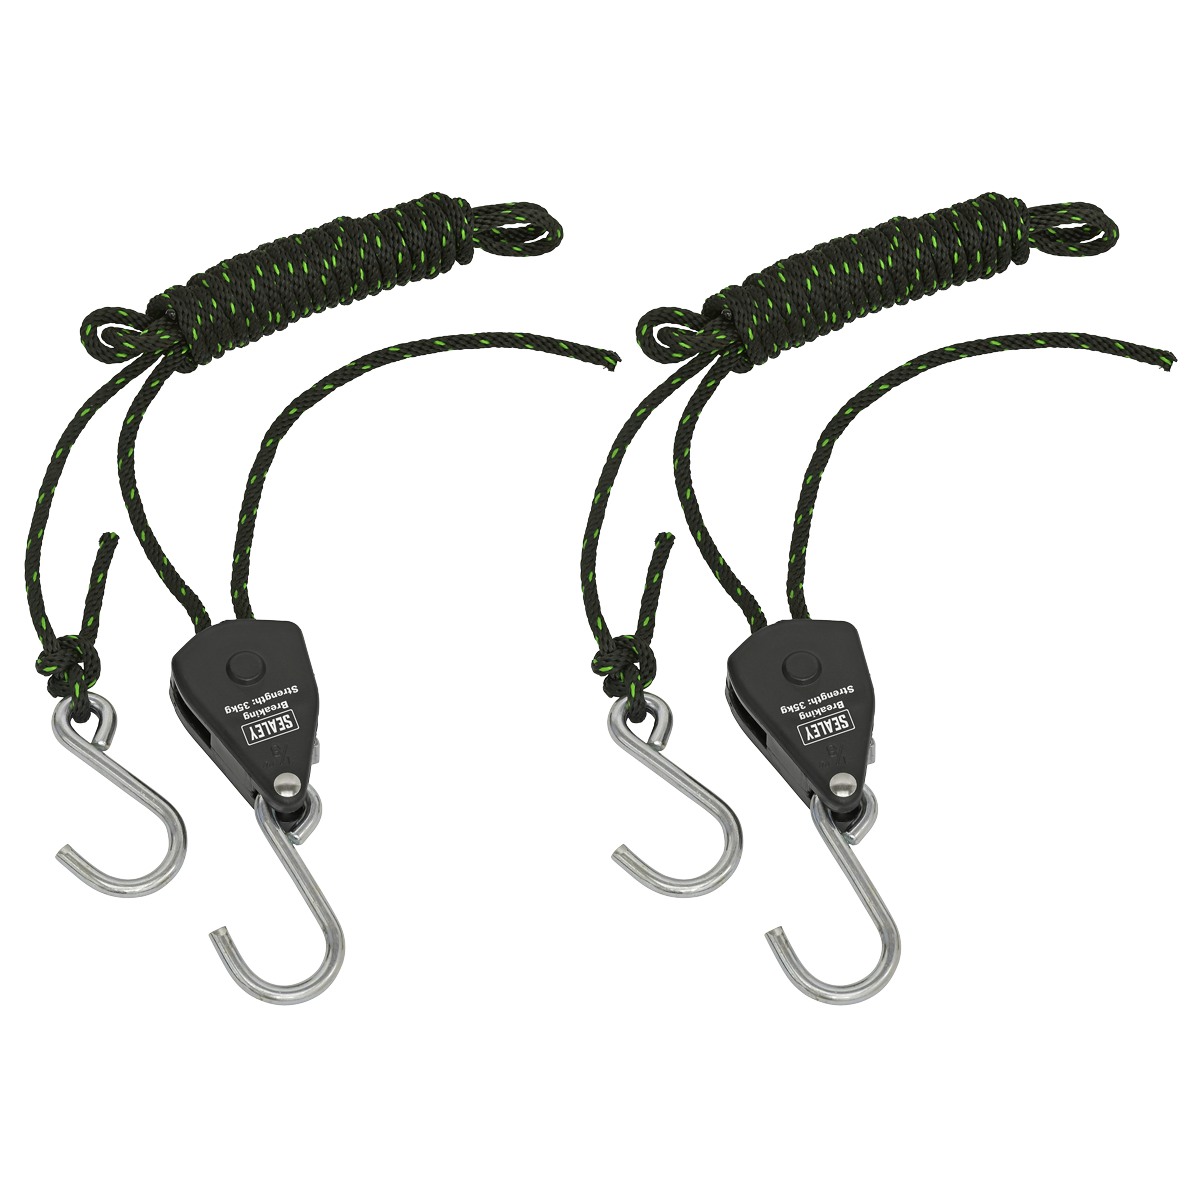 Sealey VS0118 Ratchet Parts Hanger/Tie Down 2m with S-Shaped Hooks - Pack of 2